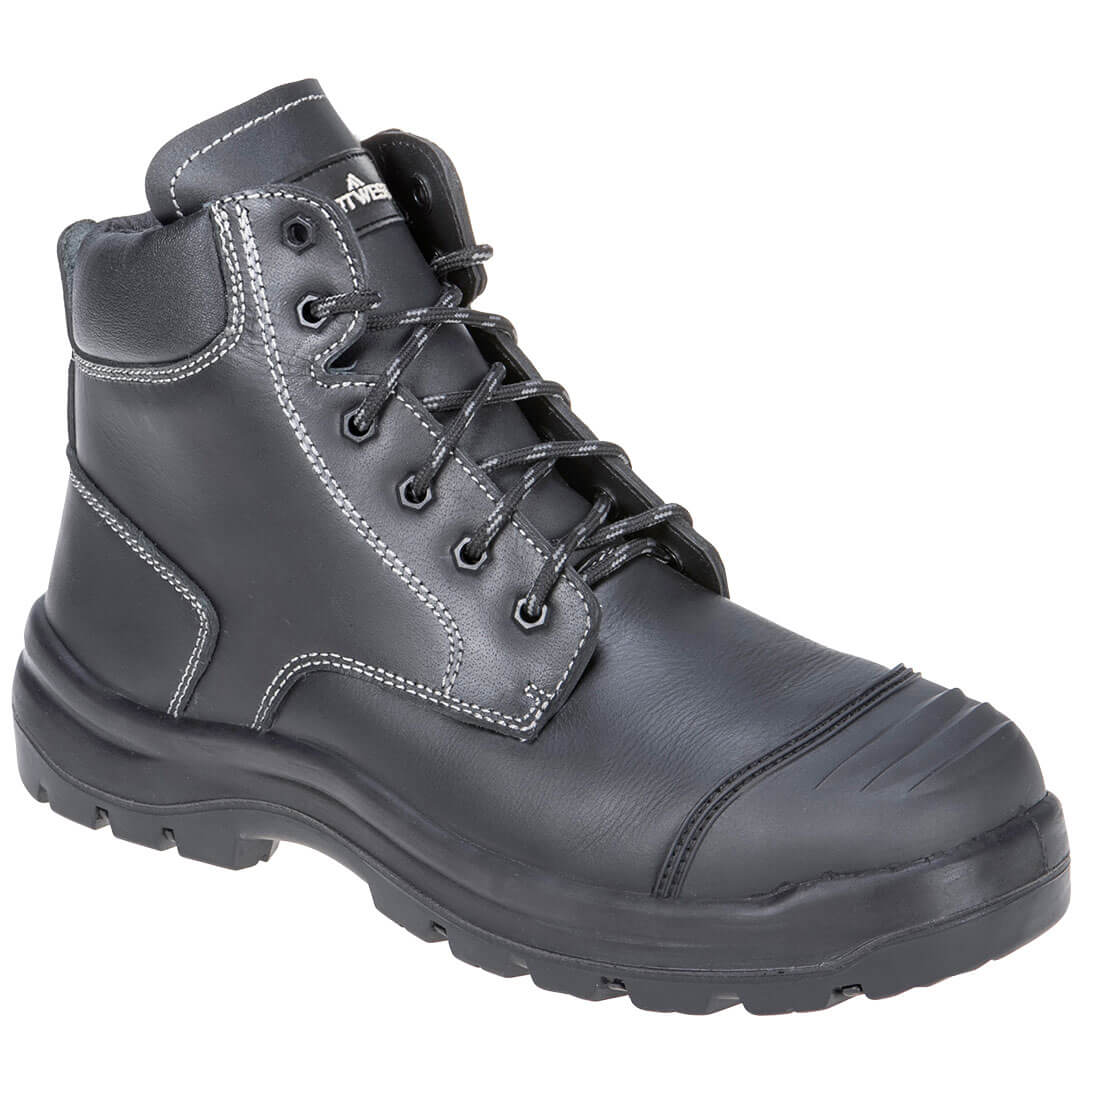 Portwest Clyde Safety Boot S3 HRO CI HI FO